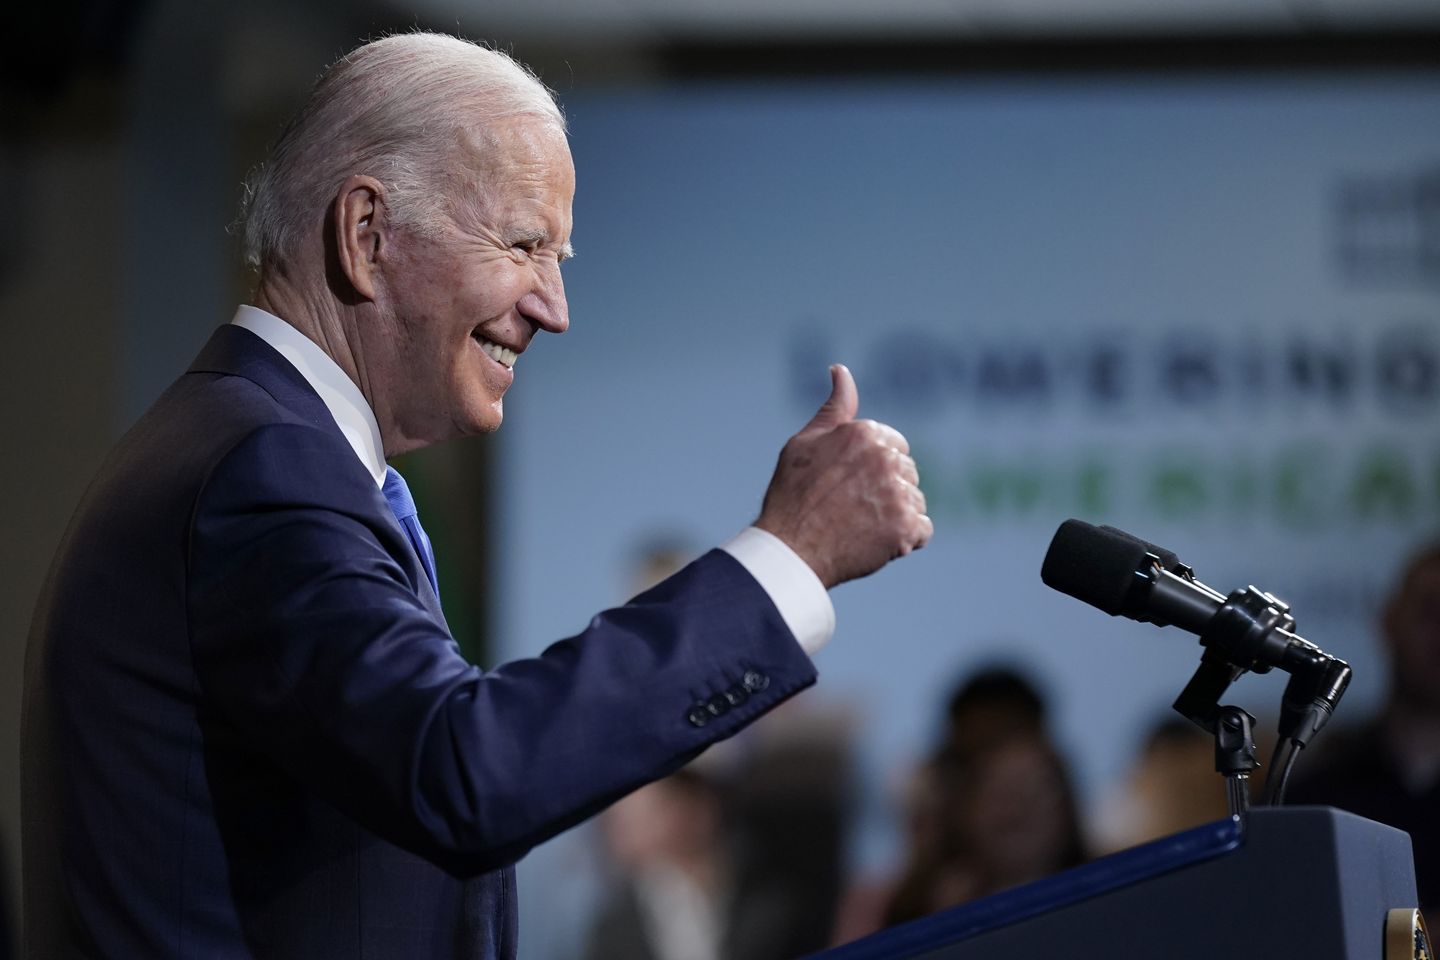 Biden stumps for big-spending agenda as a way to alleviate rising costs